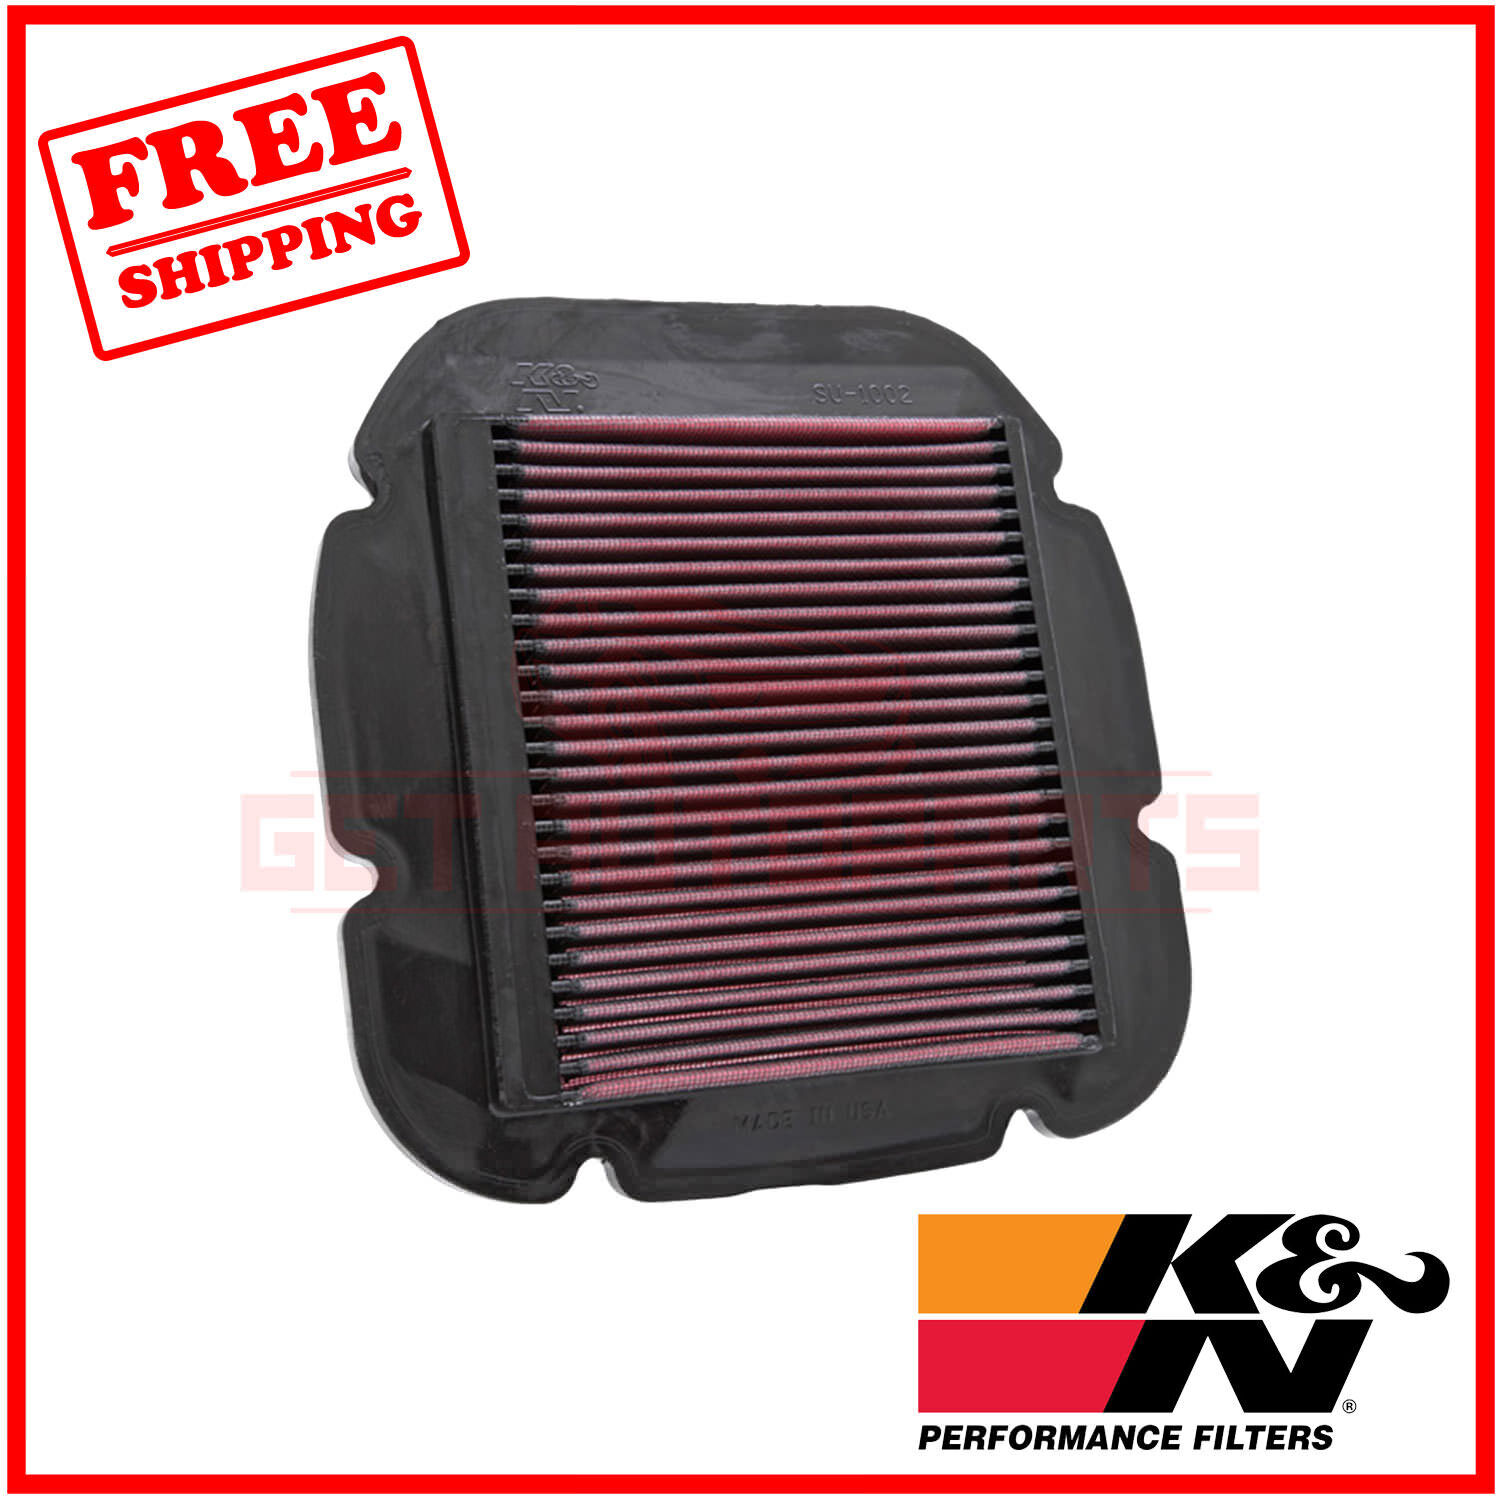 K&N Replacement Air Filter for Suzuki DL650 V-Strom 2004-2009